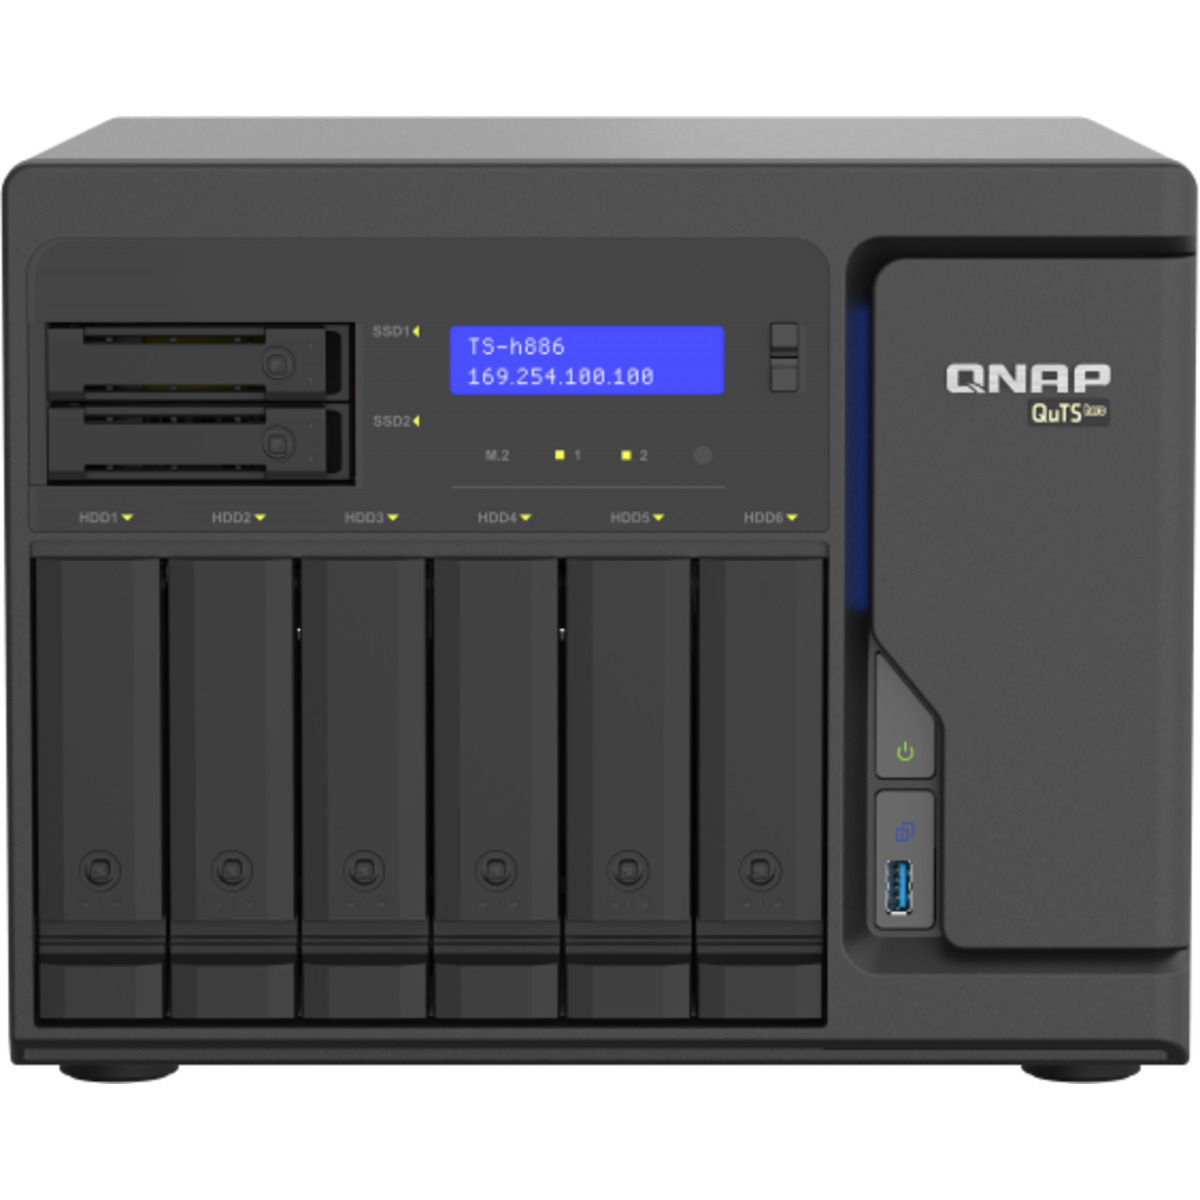 QNAP TS-h886 QuTS hero NAS 60tb 6+2-Bay Desktop Large Business / Enterprise NAS - Network Attached Storage Device 6x10tb Western Digital Red Pro WD102KFBX 3.5 7200rpm SATA 6Gb/s HDD NAS Class Drives Installed - Burn-In Tested TS-h886 QuTS hero NAS